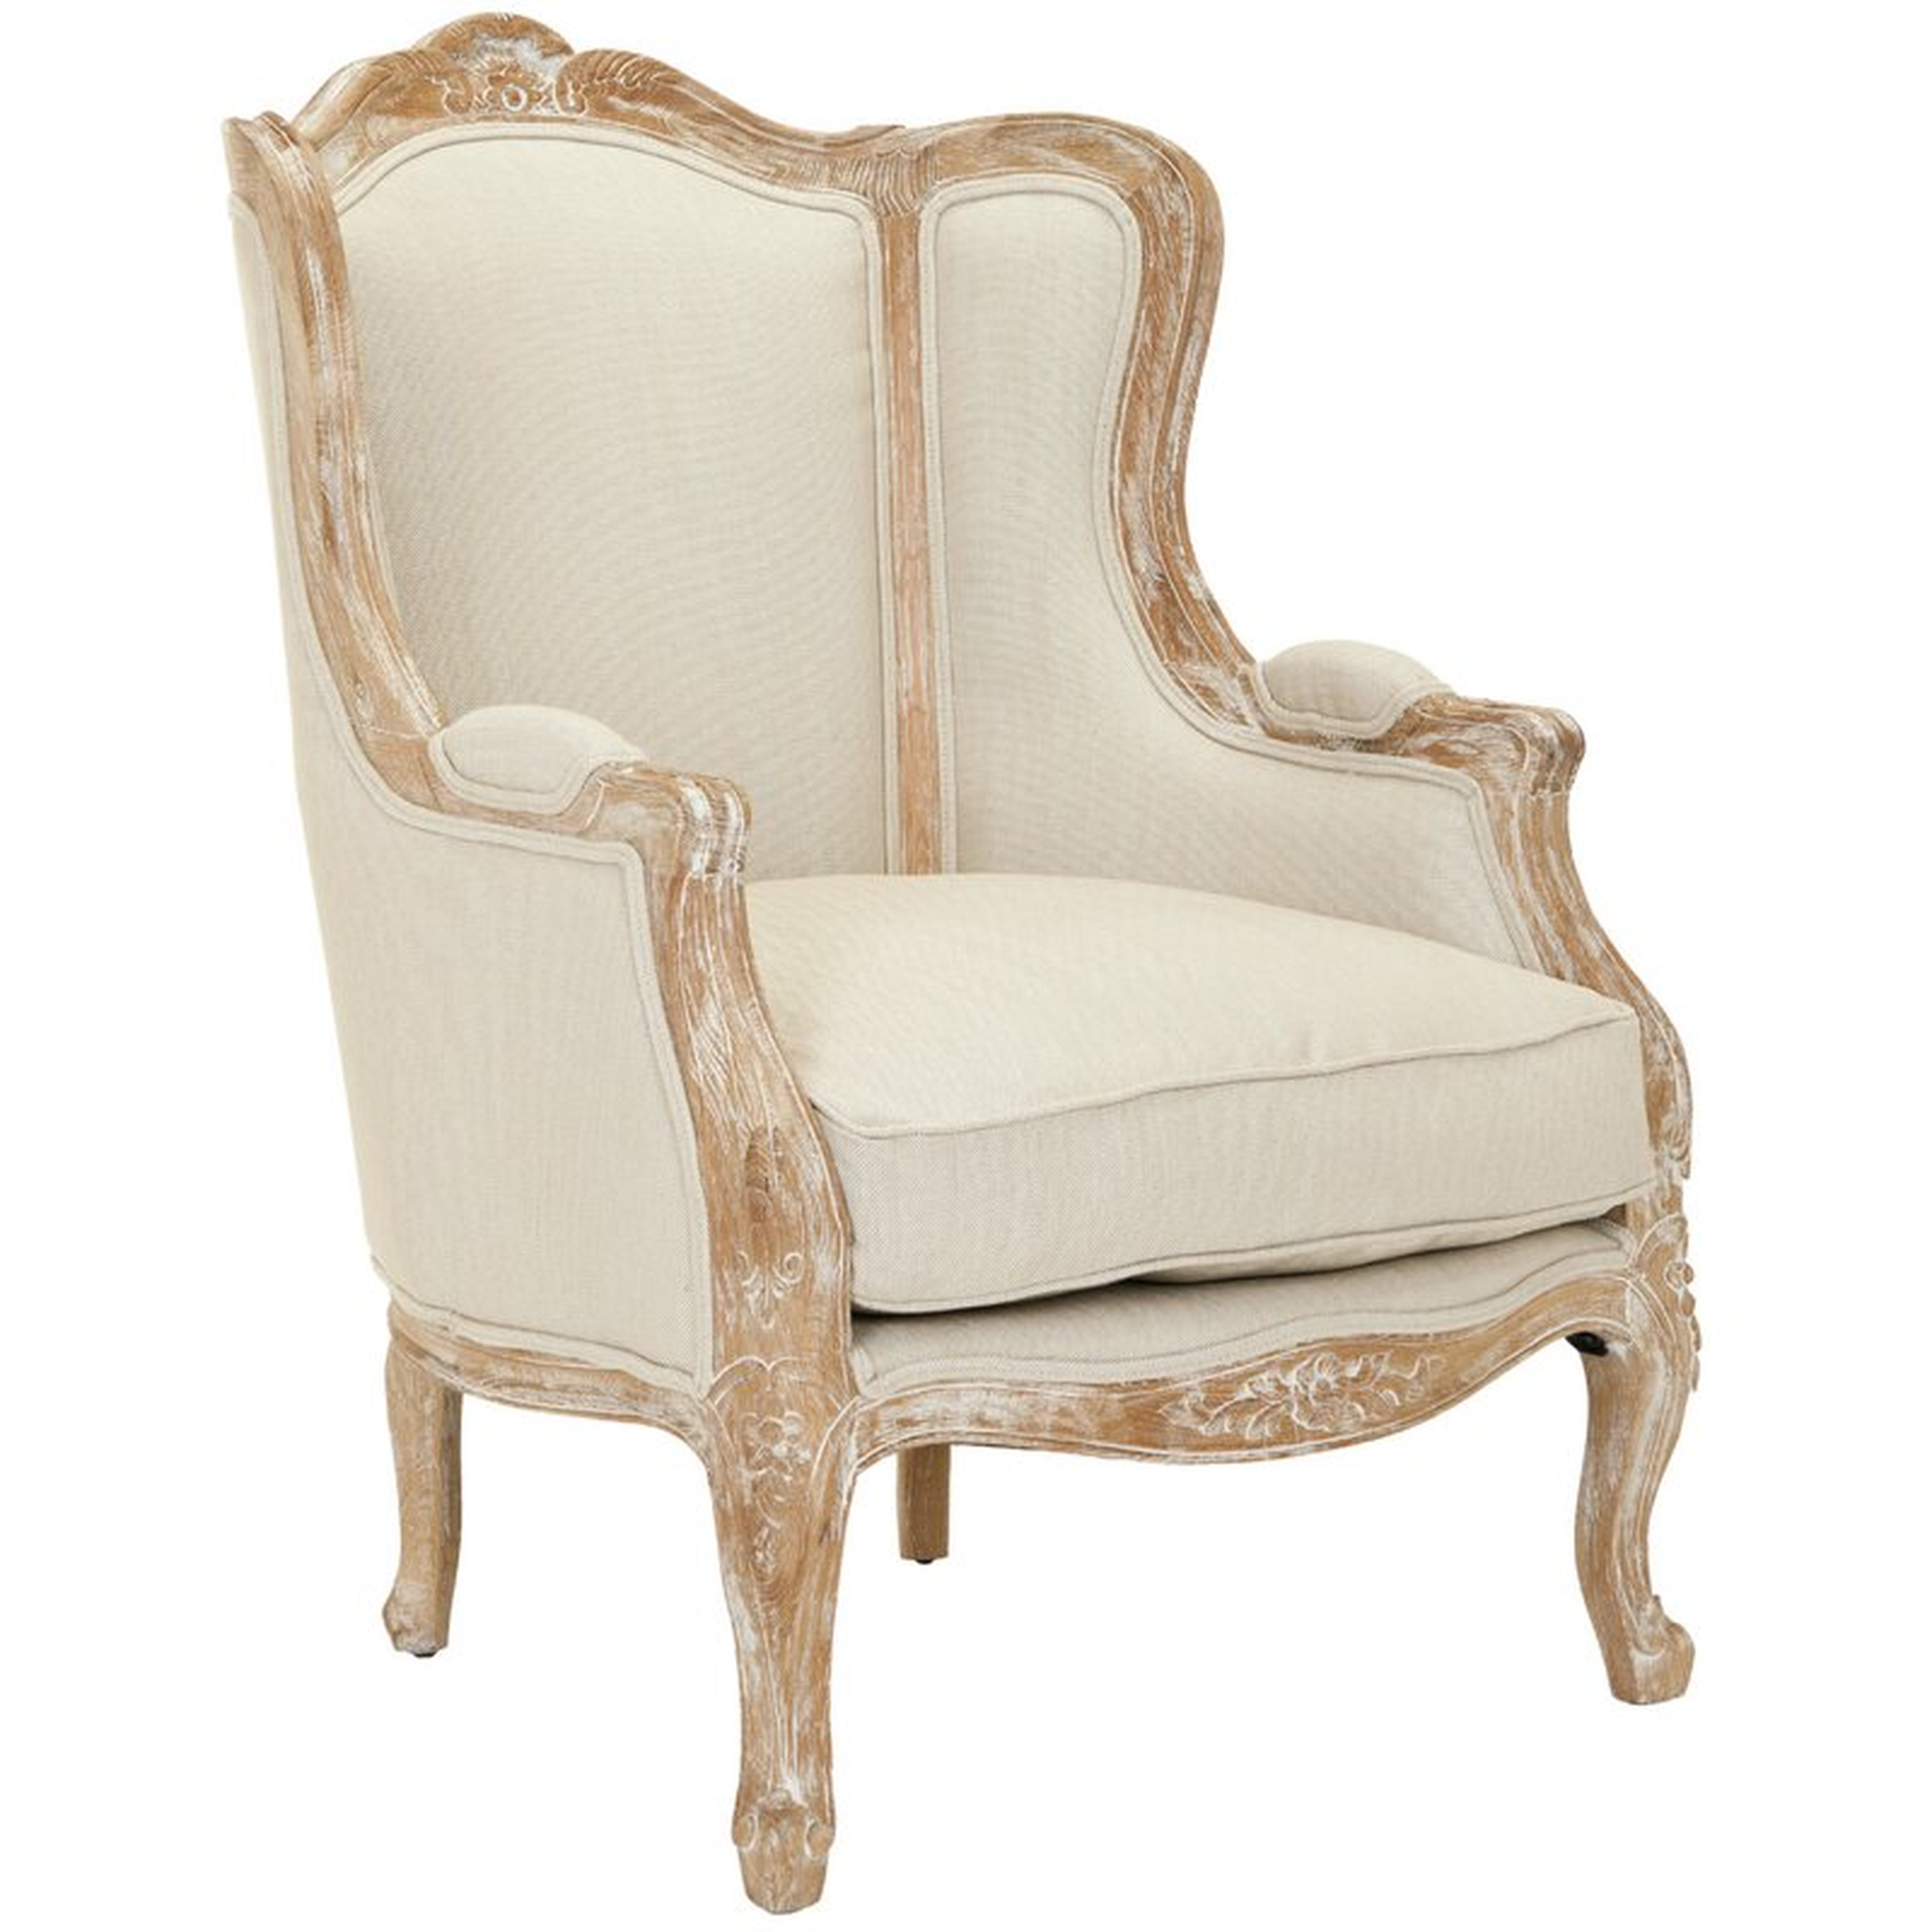 Safavieh Couture Couture Wingback Chair - Perigold